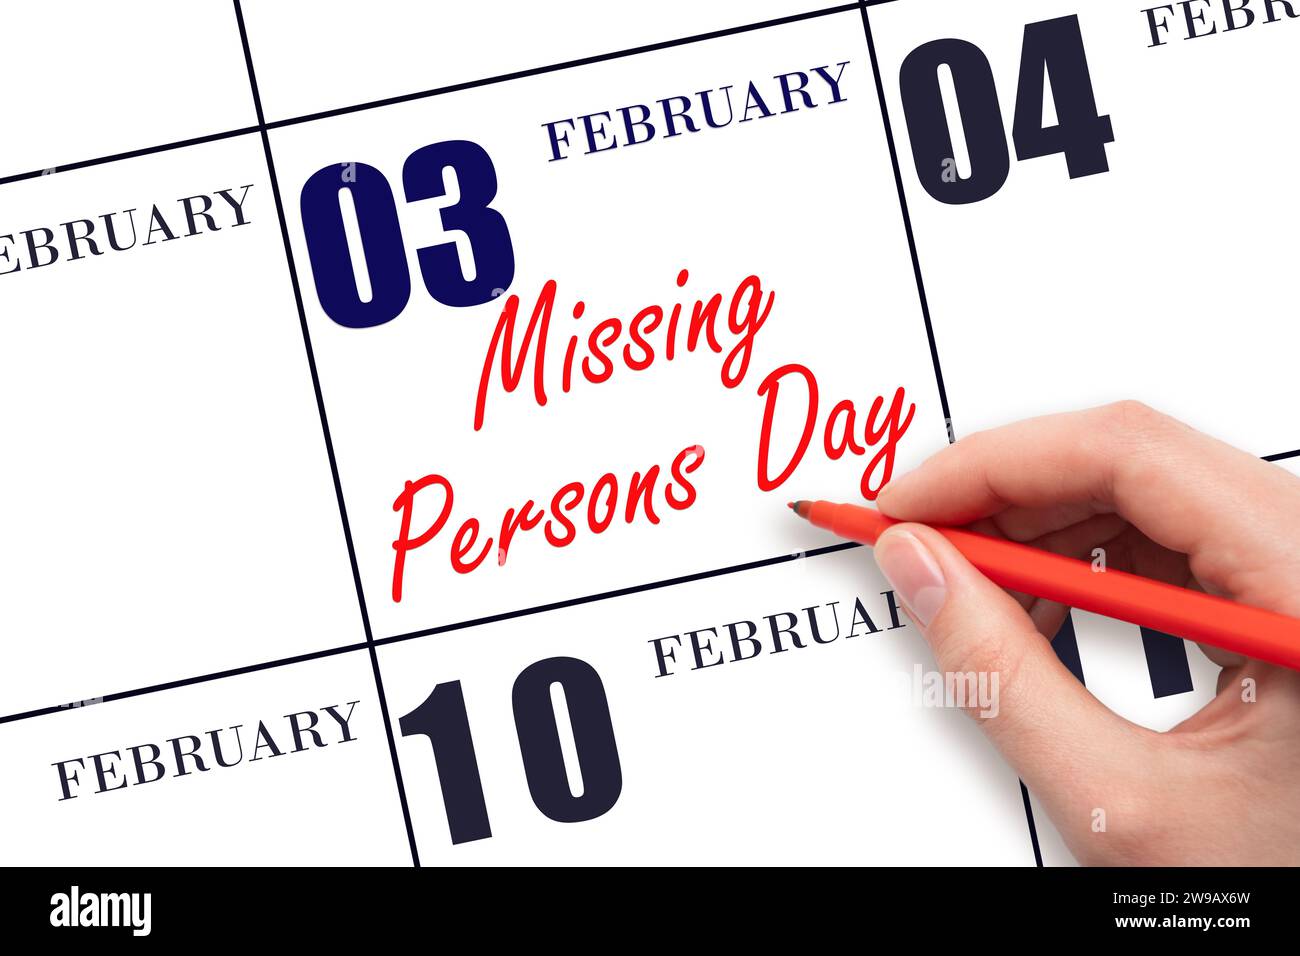 February 3. Hand writing text Missing Persons Day on calendar date. Save the date. Holiday.  Day of the year concept. Stock Photo